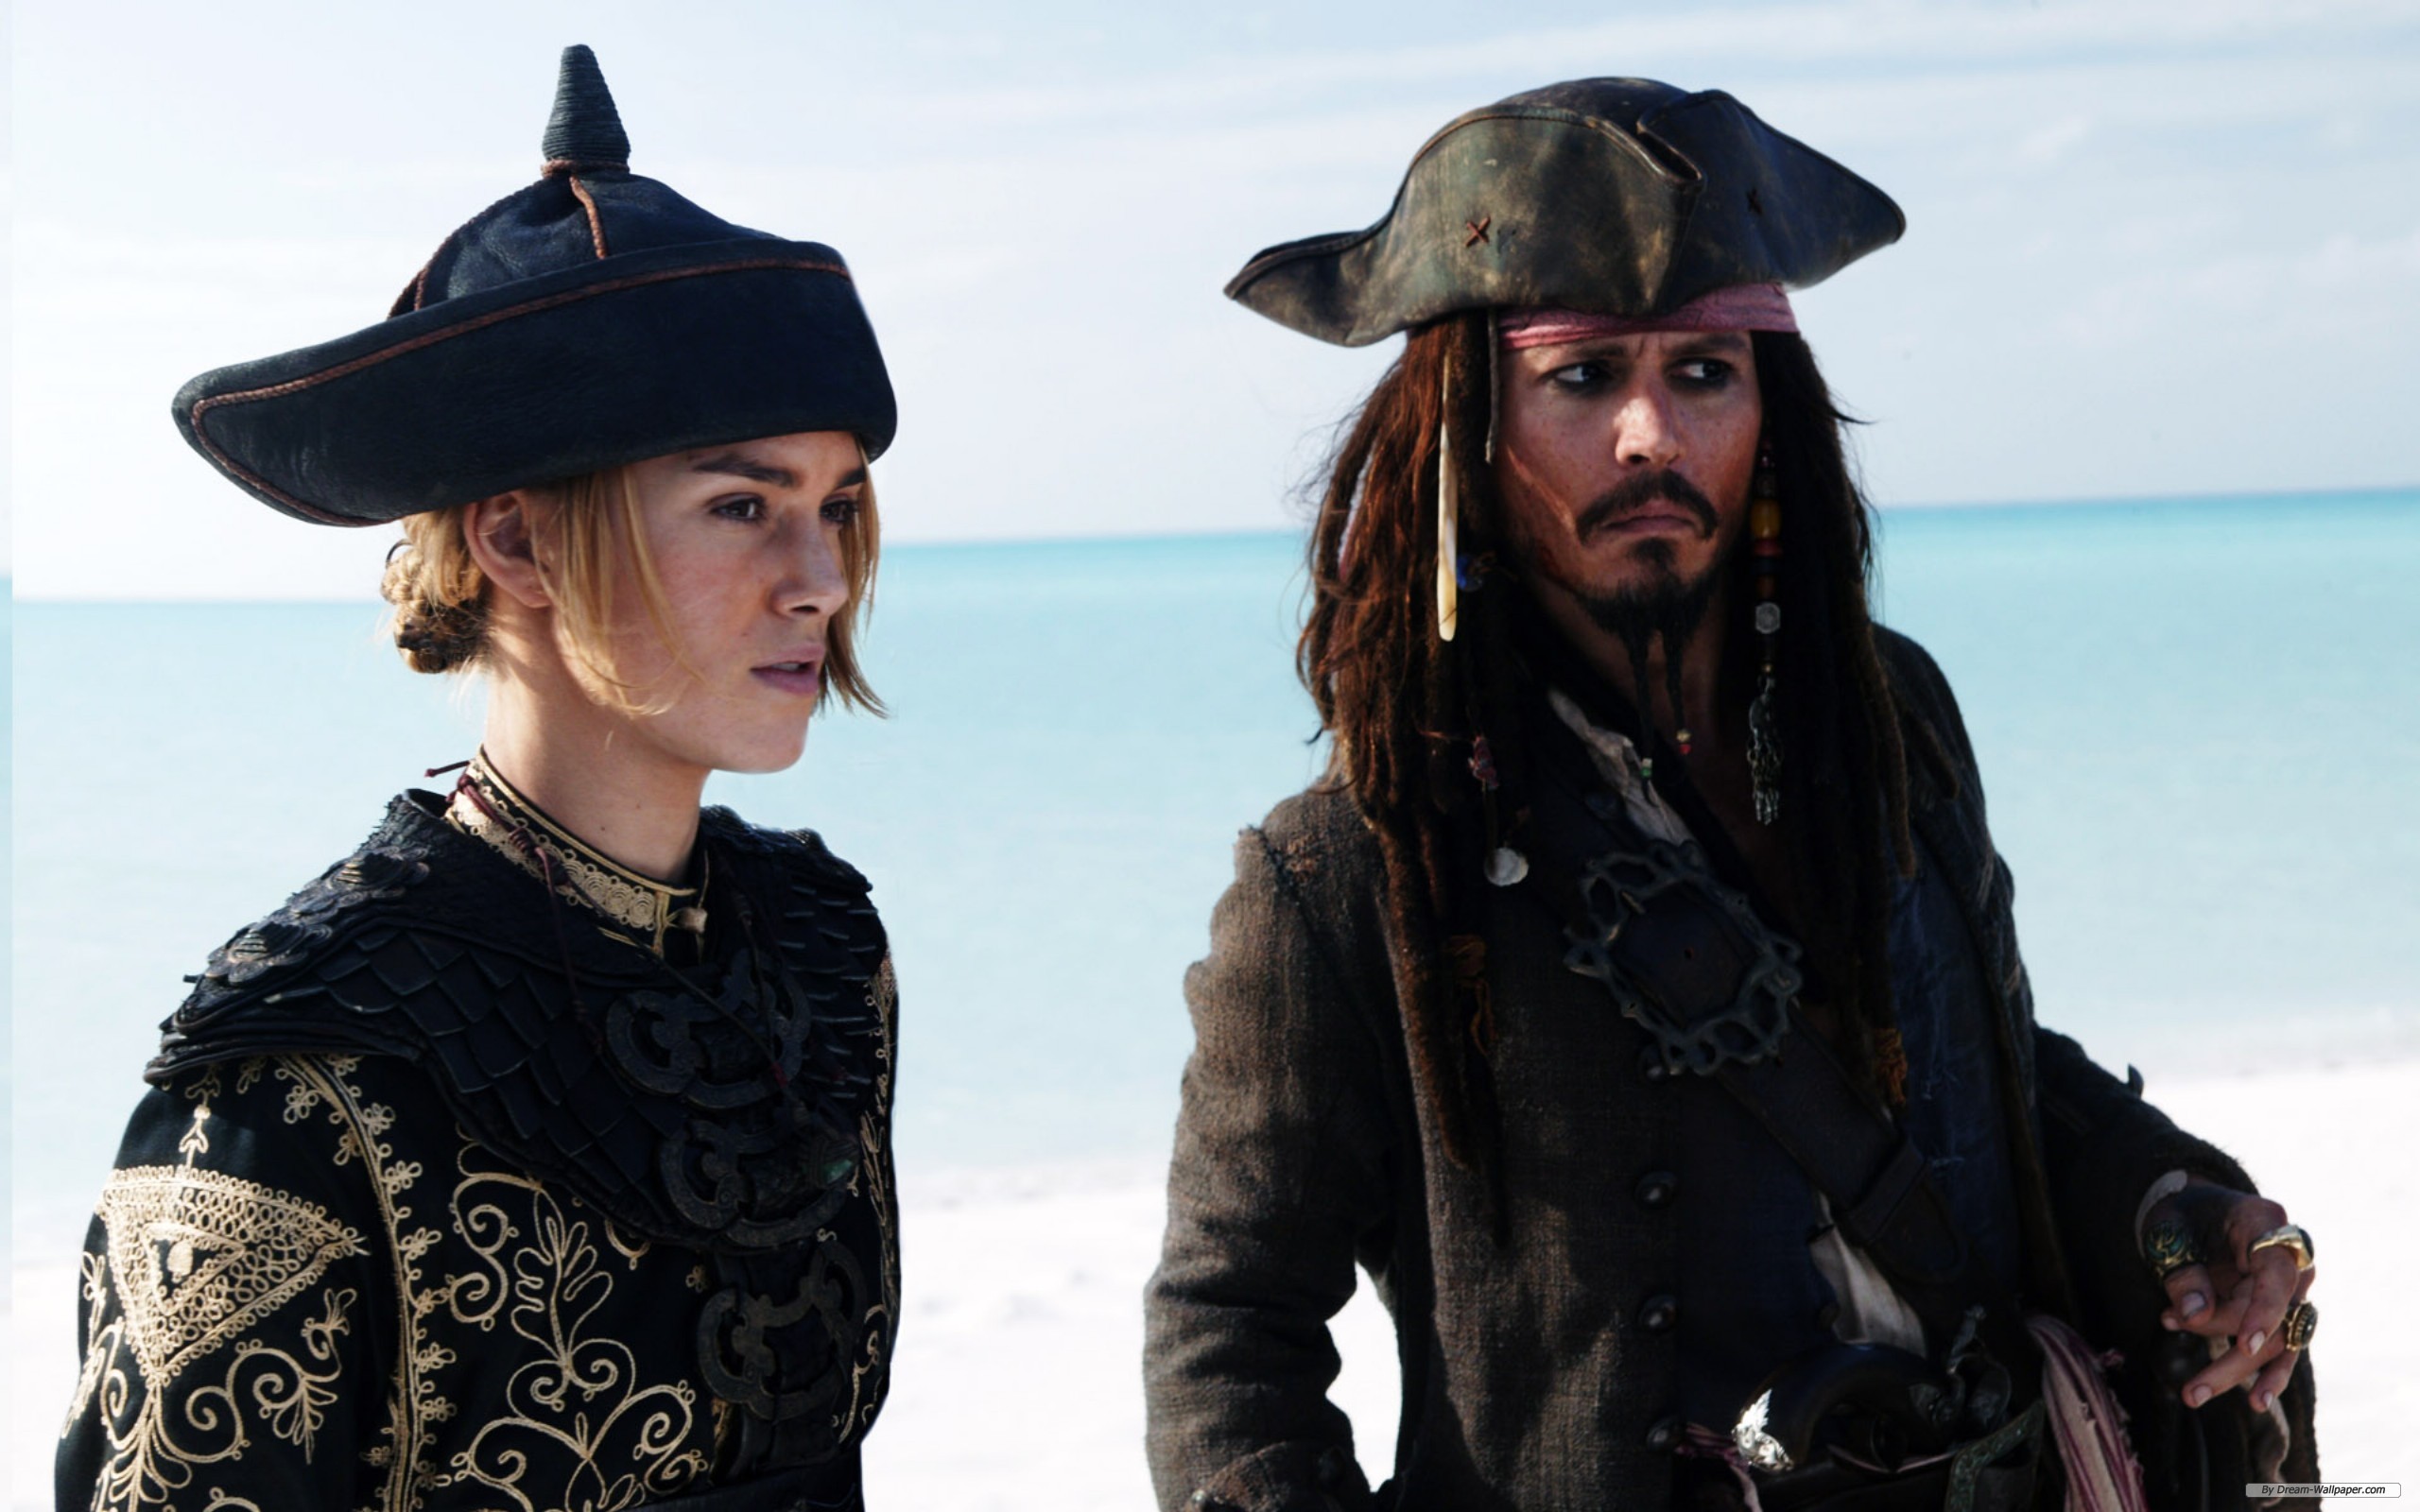 Captain Jack Sparrow and Elizabeth Swann in Pirates of the Caribbean: At World's End wallpaper.